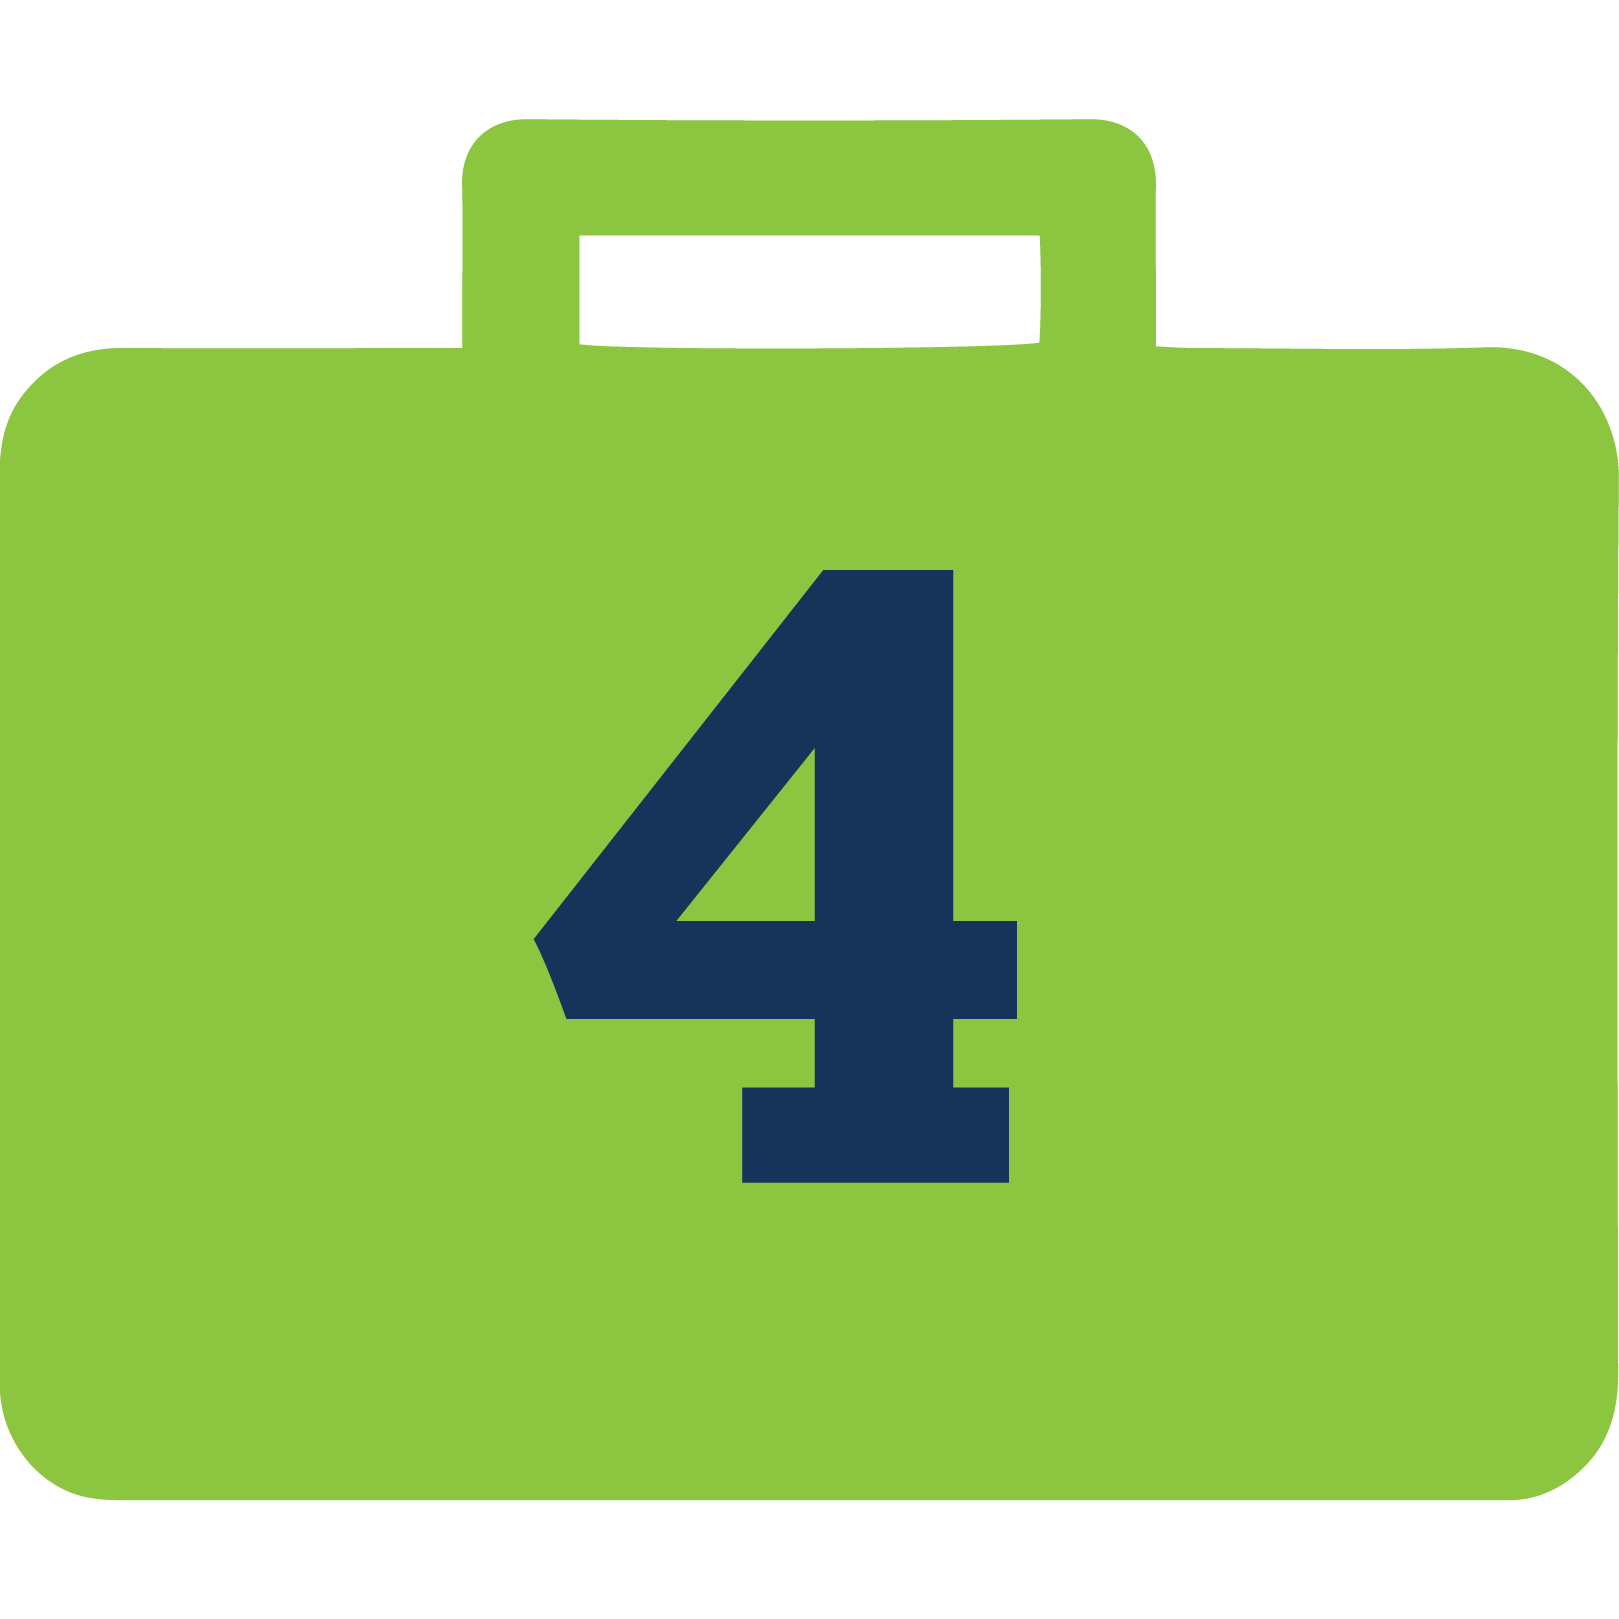 Green briefcase illustration with number four